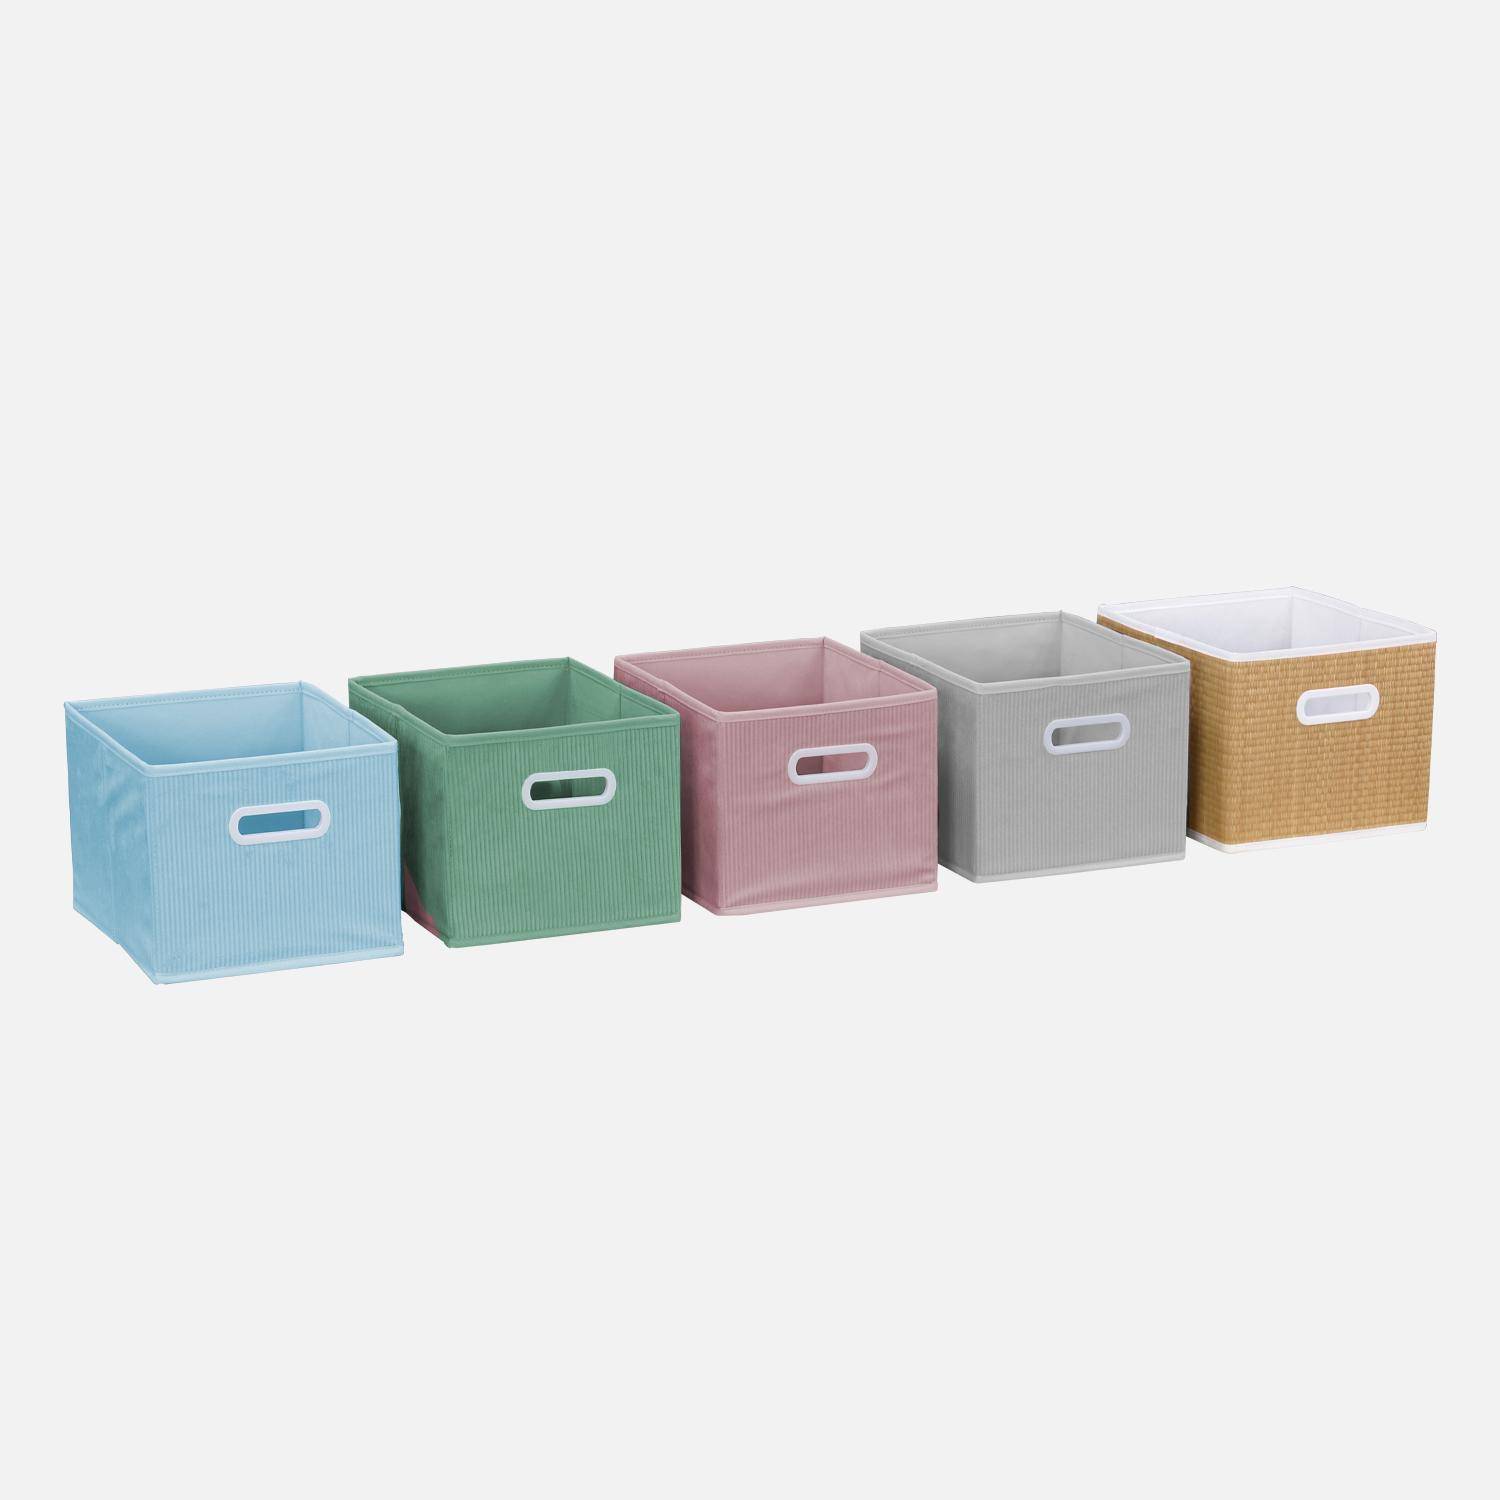 Storage unit for children with 7 compartments and 3 green baskets and 3 grey velvet baskets Photo4